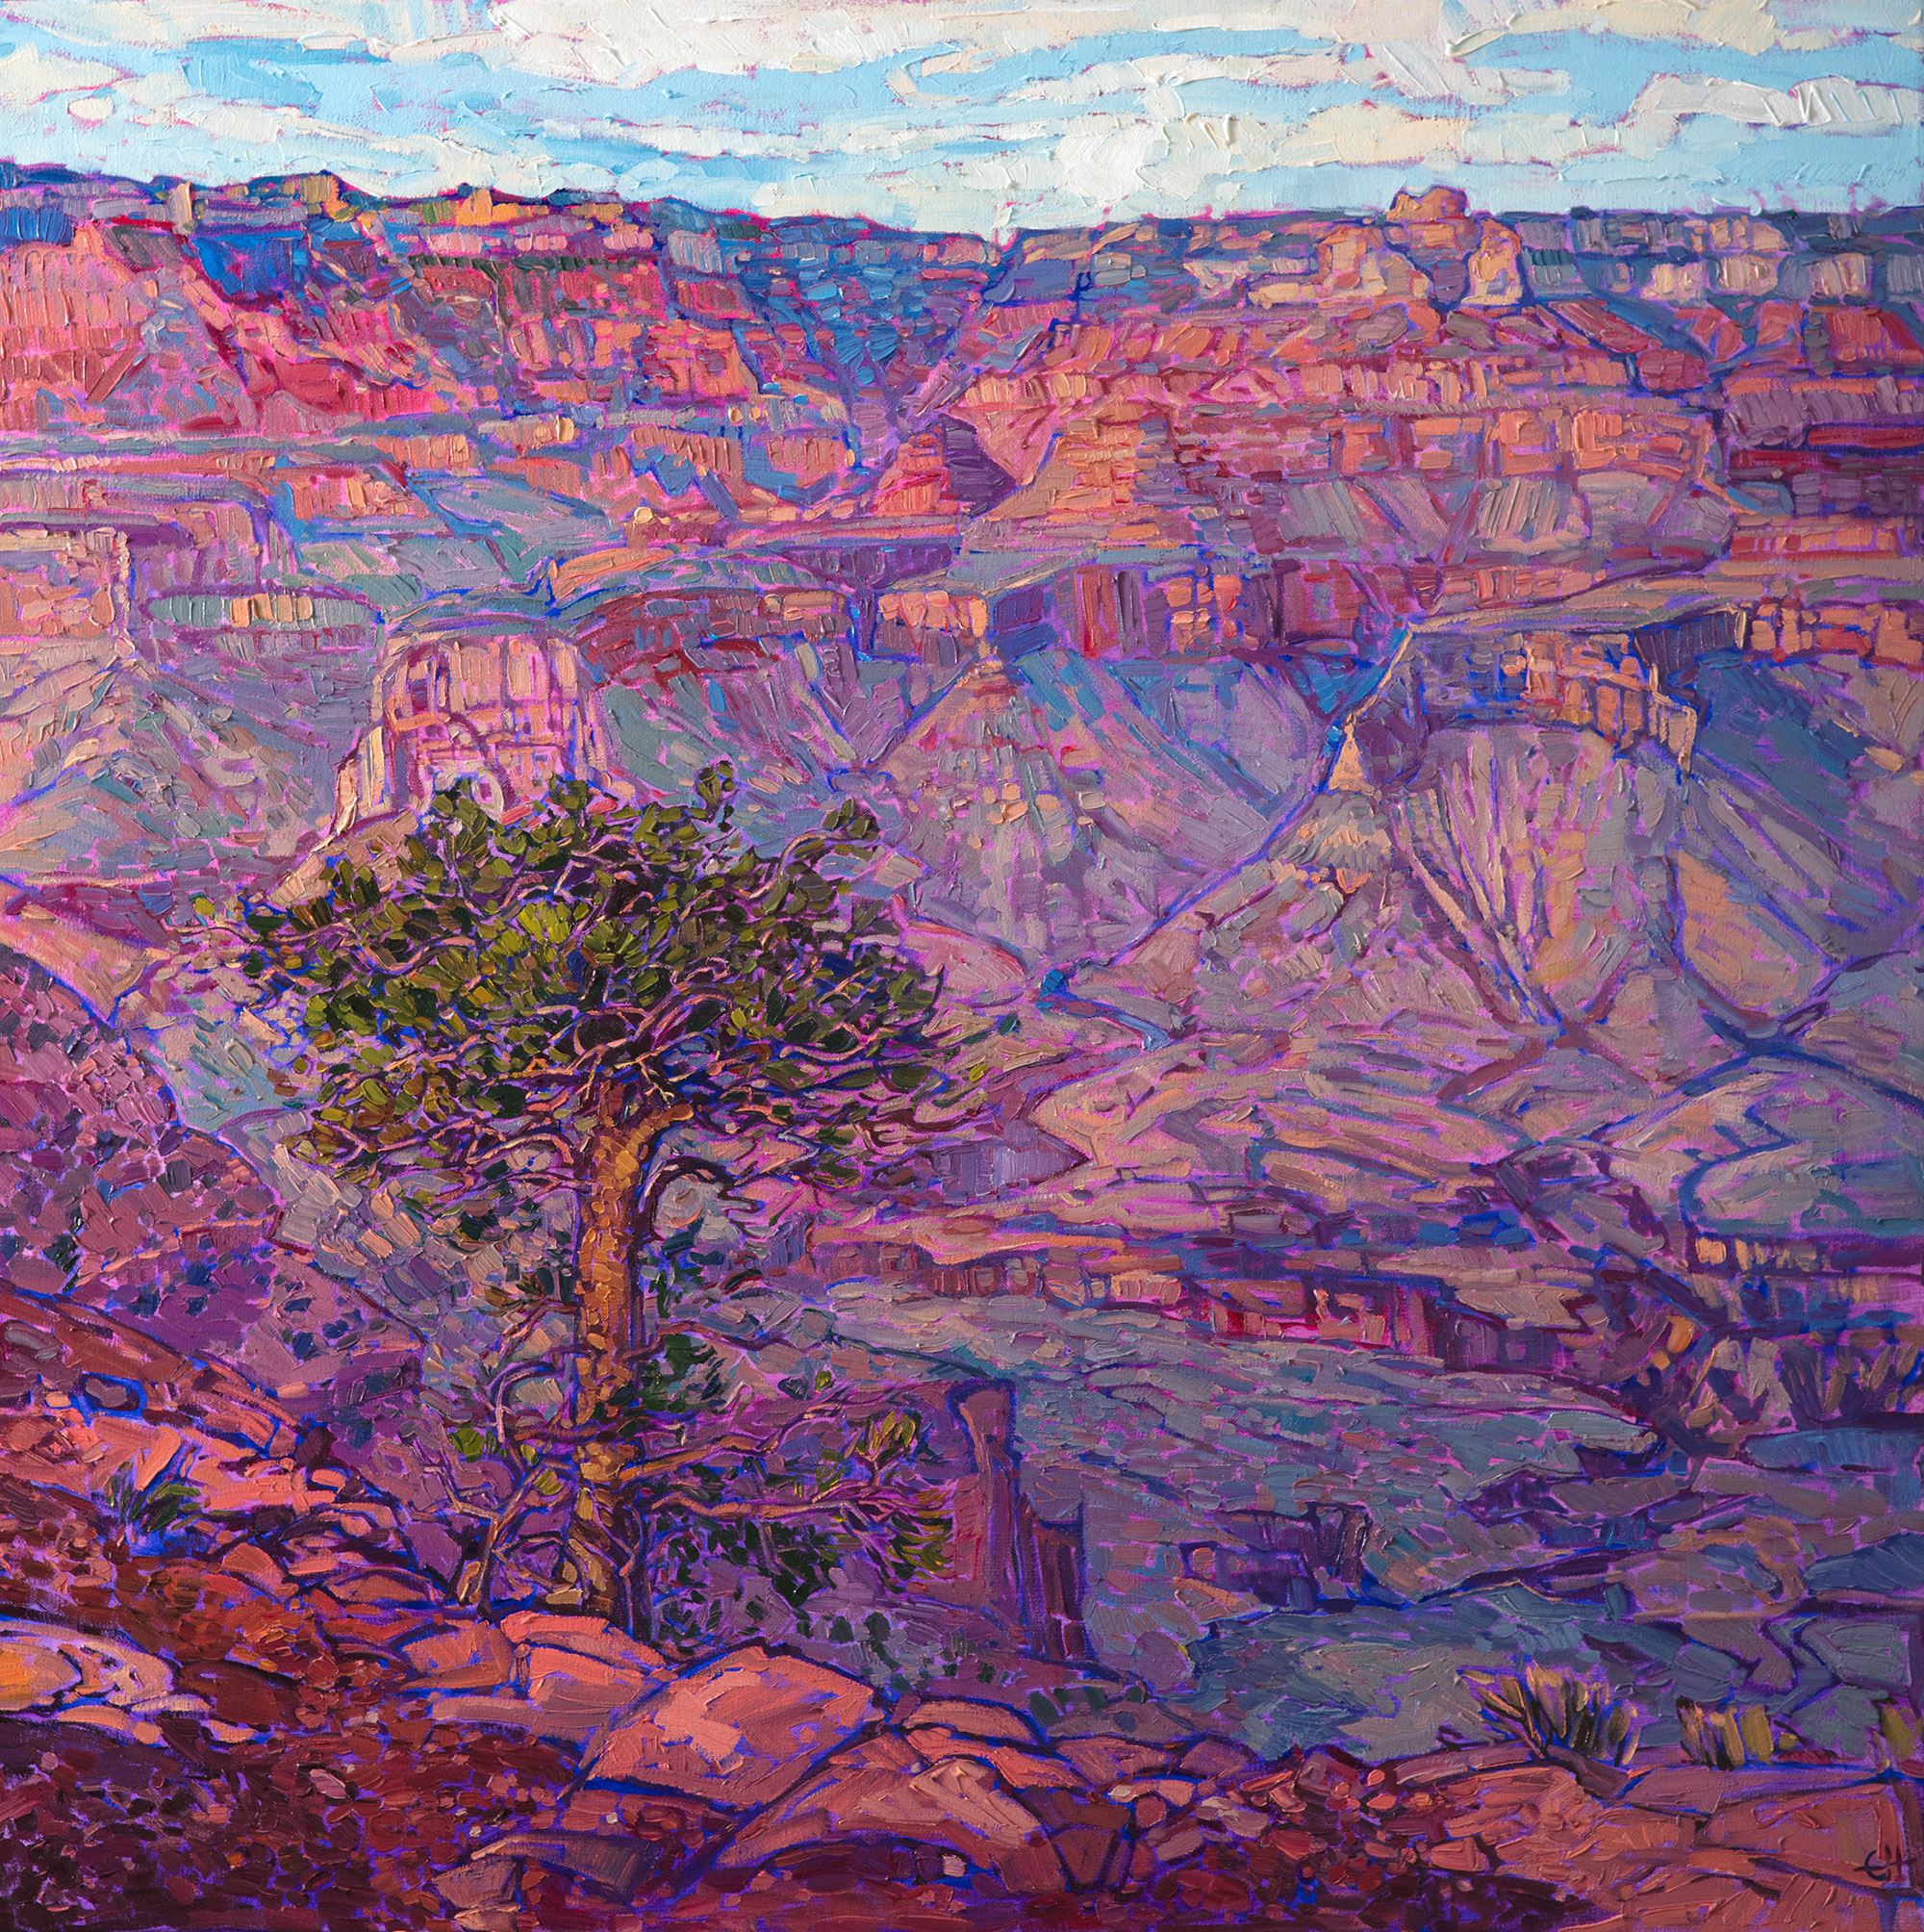 Follow In Erin Hanson's Footsteps: Explore the Grand Canyon Like an Artist 